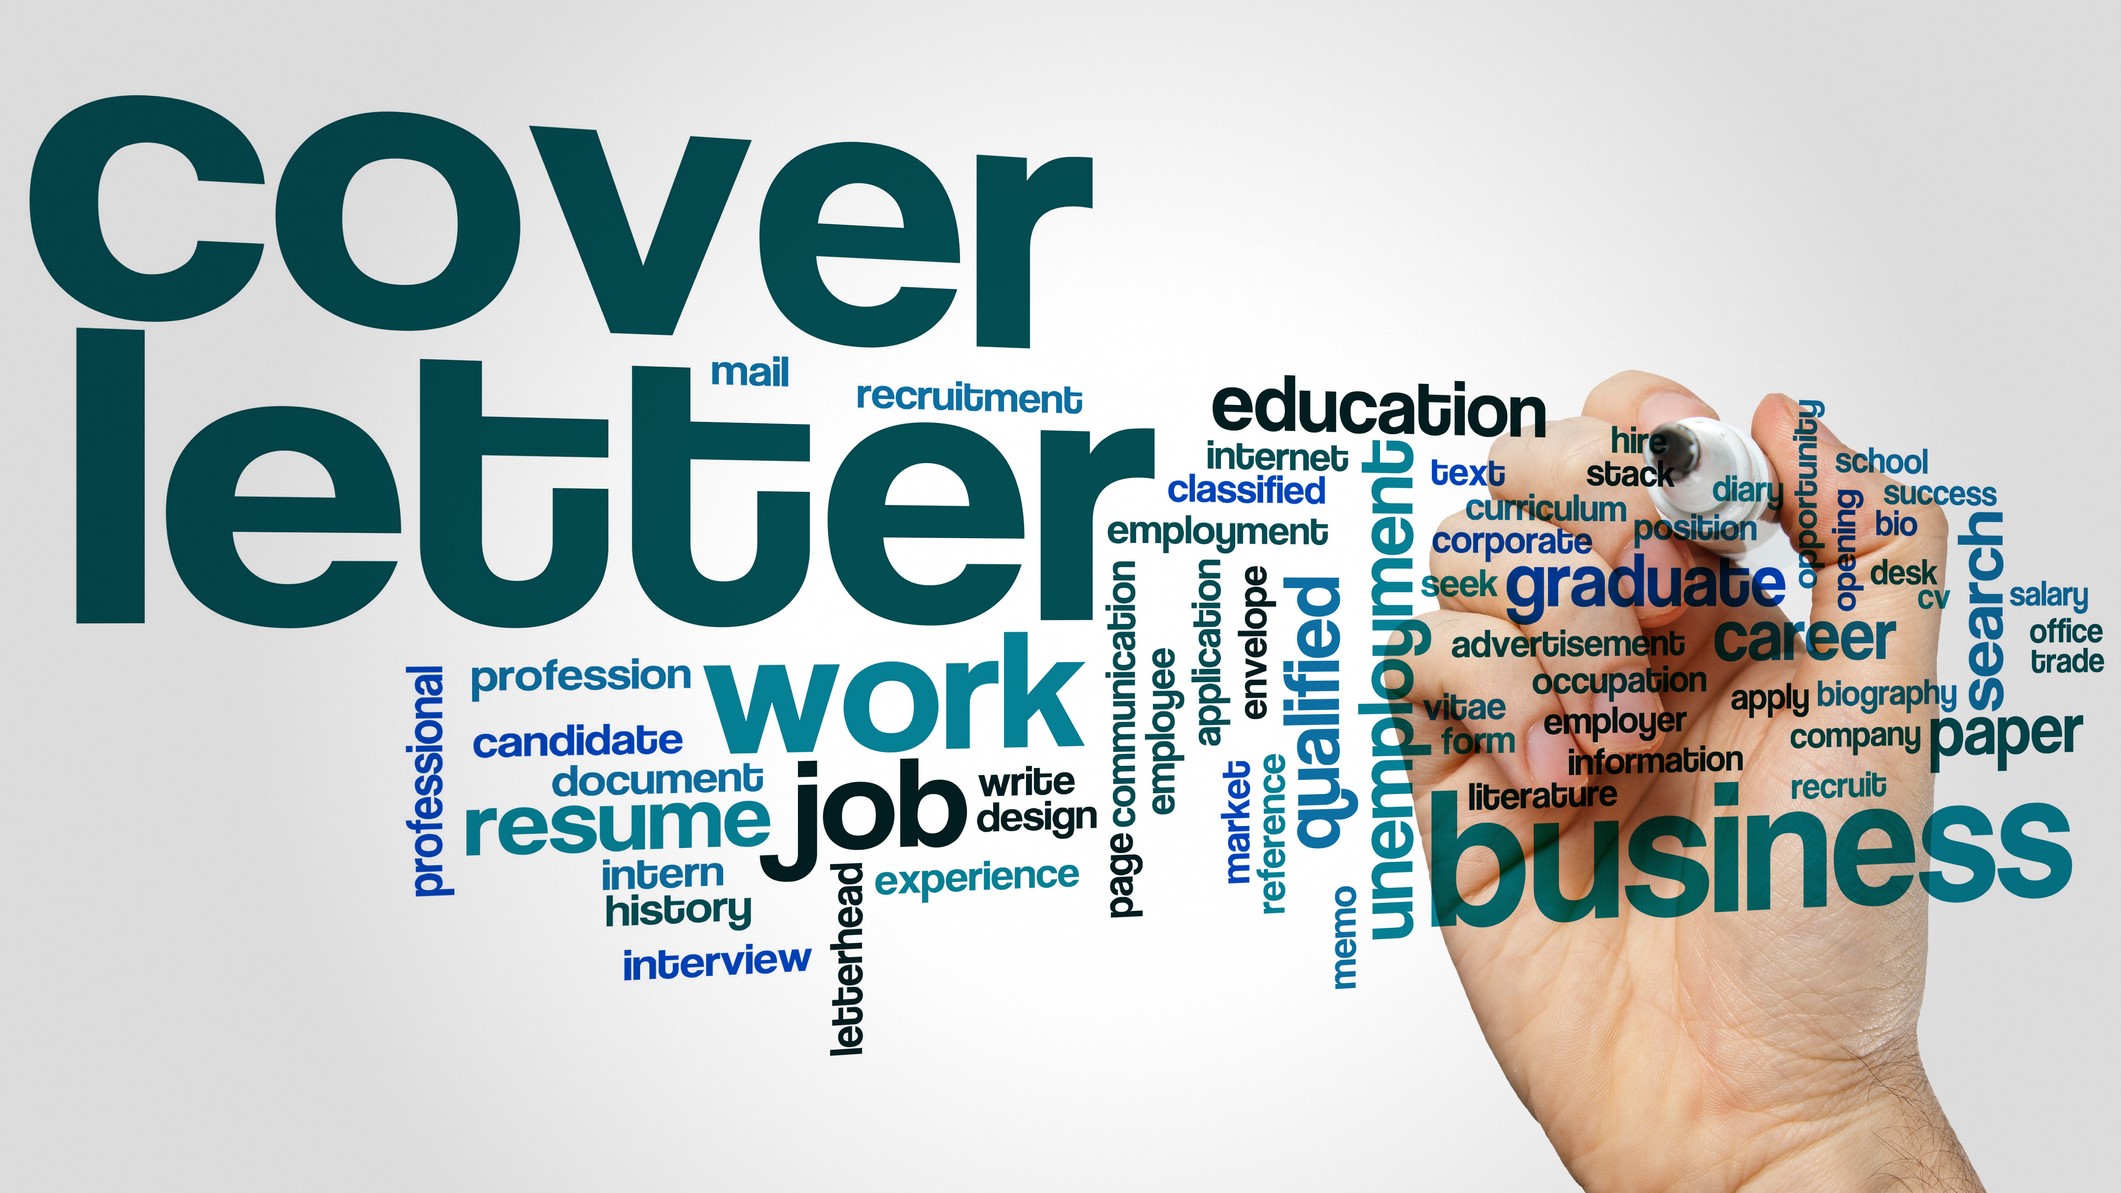 5 Easy Steps to Write an Effective Cover Letter